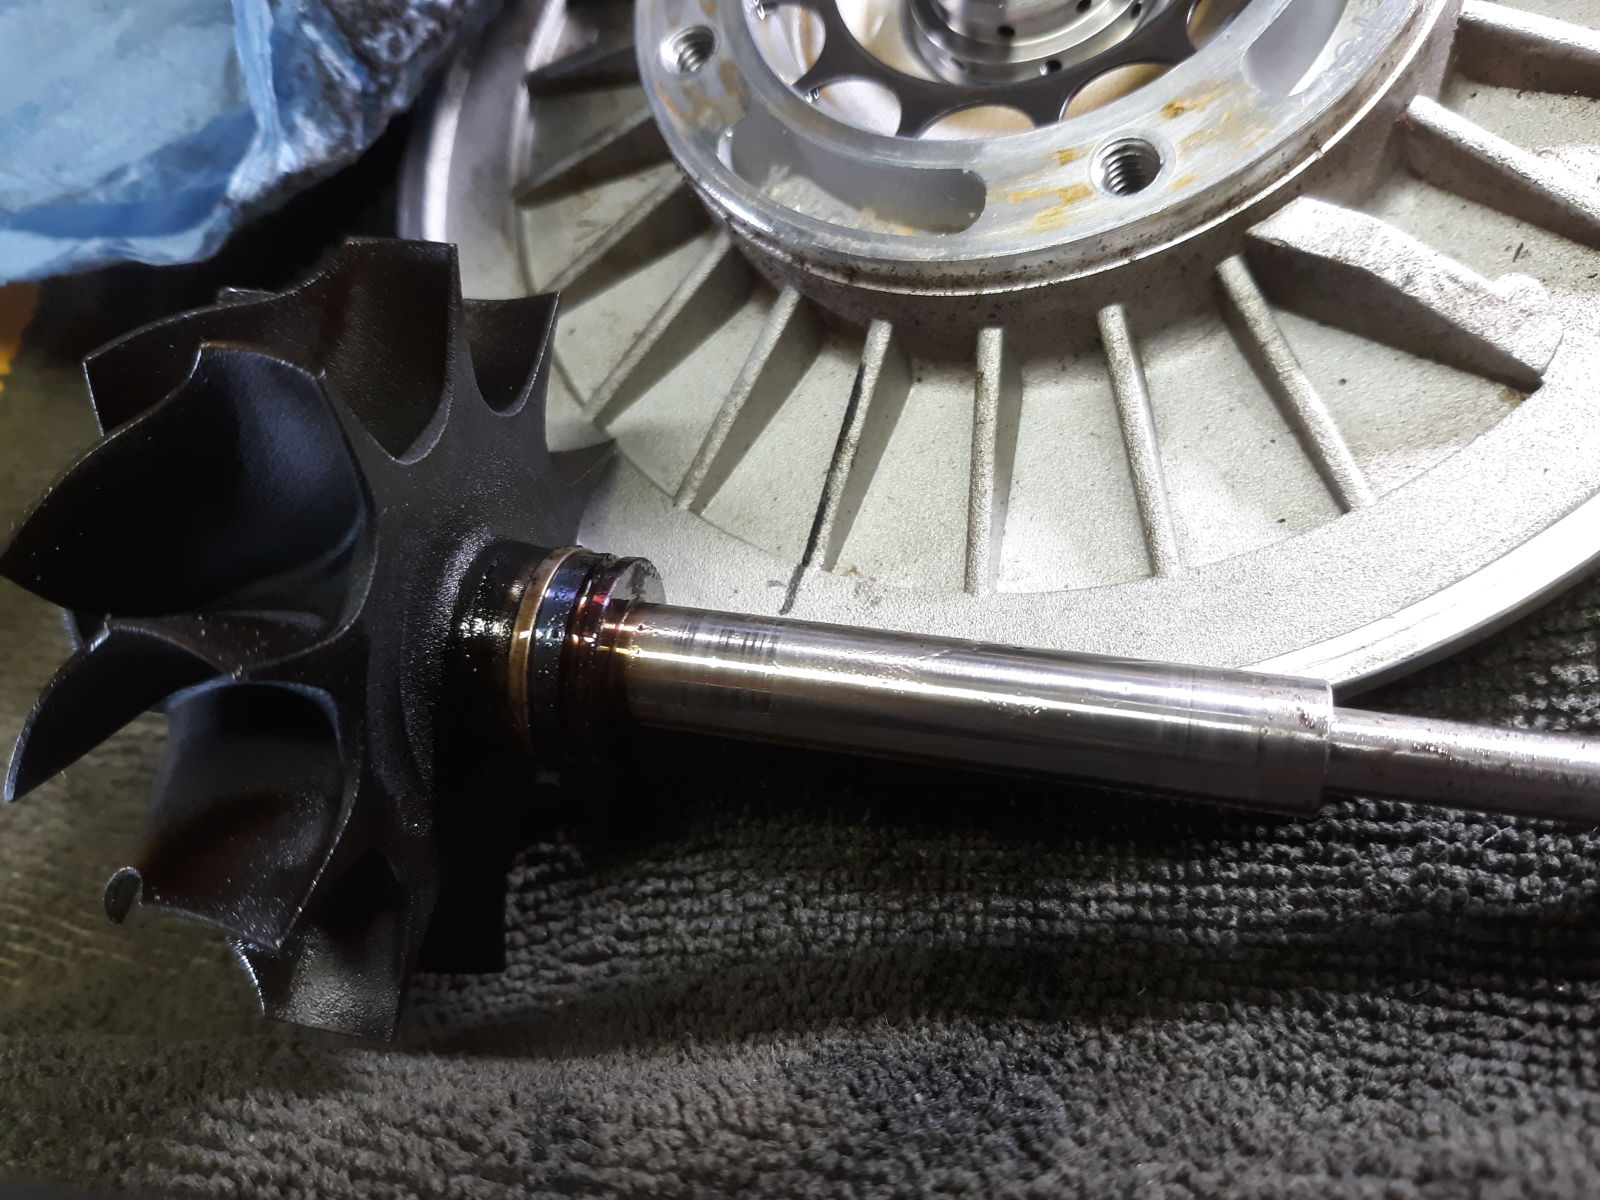 This was the good shaft, the other had deep grooves where the bearing dug in, these turbos had run at low or no oil pressure in a previous setup so you cant expect much.